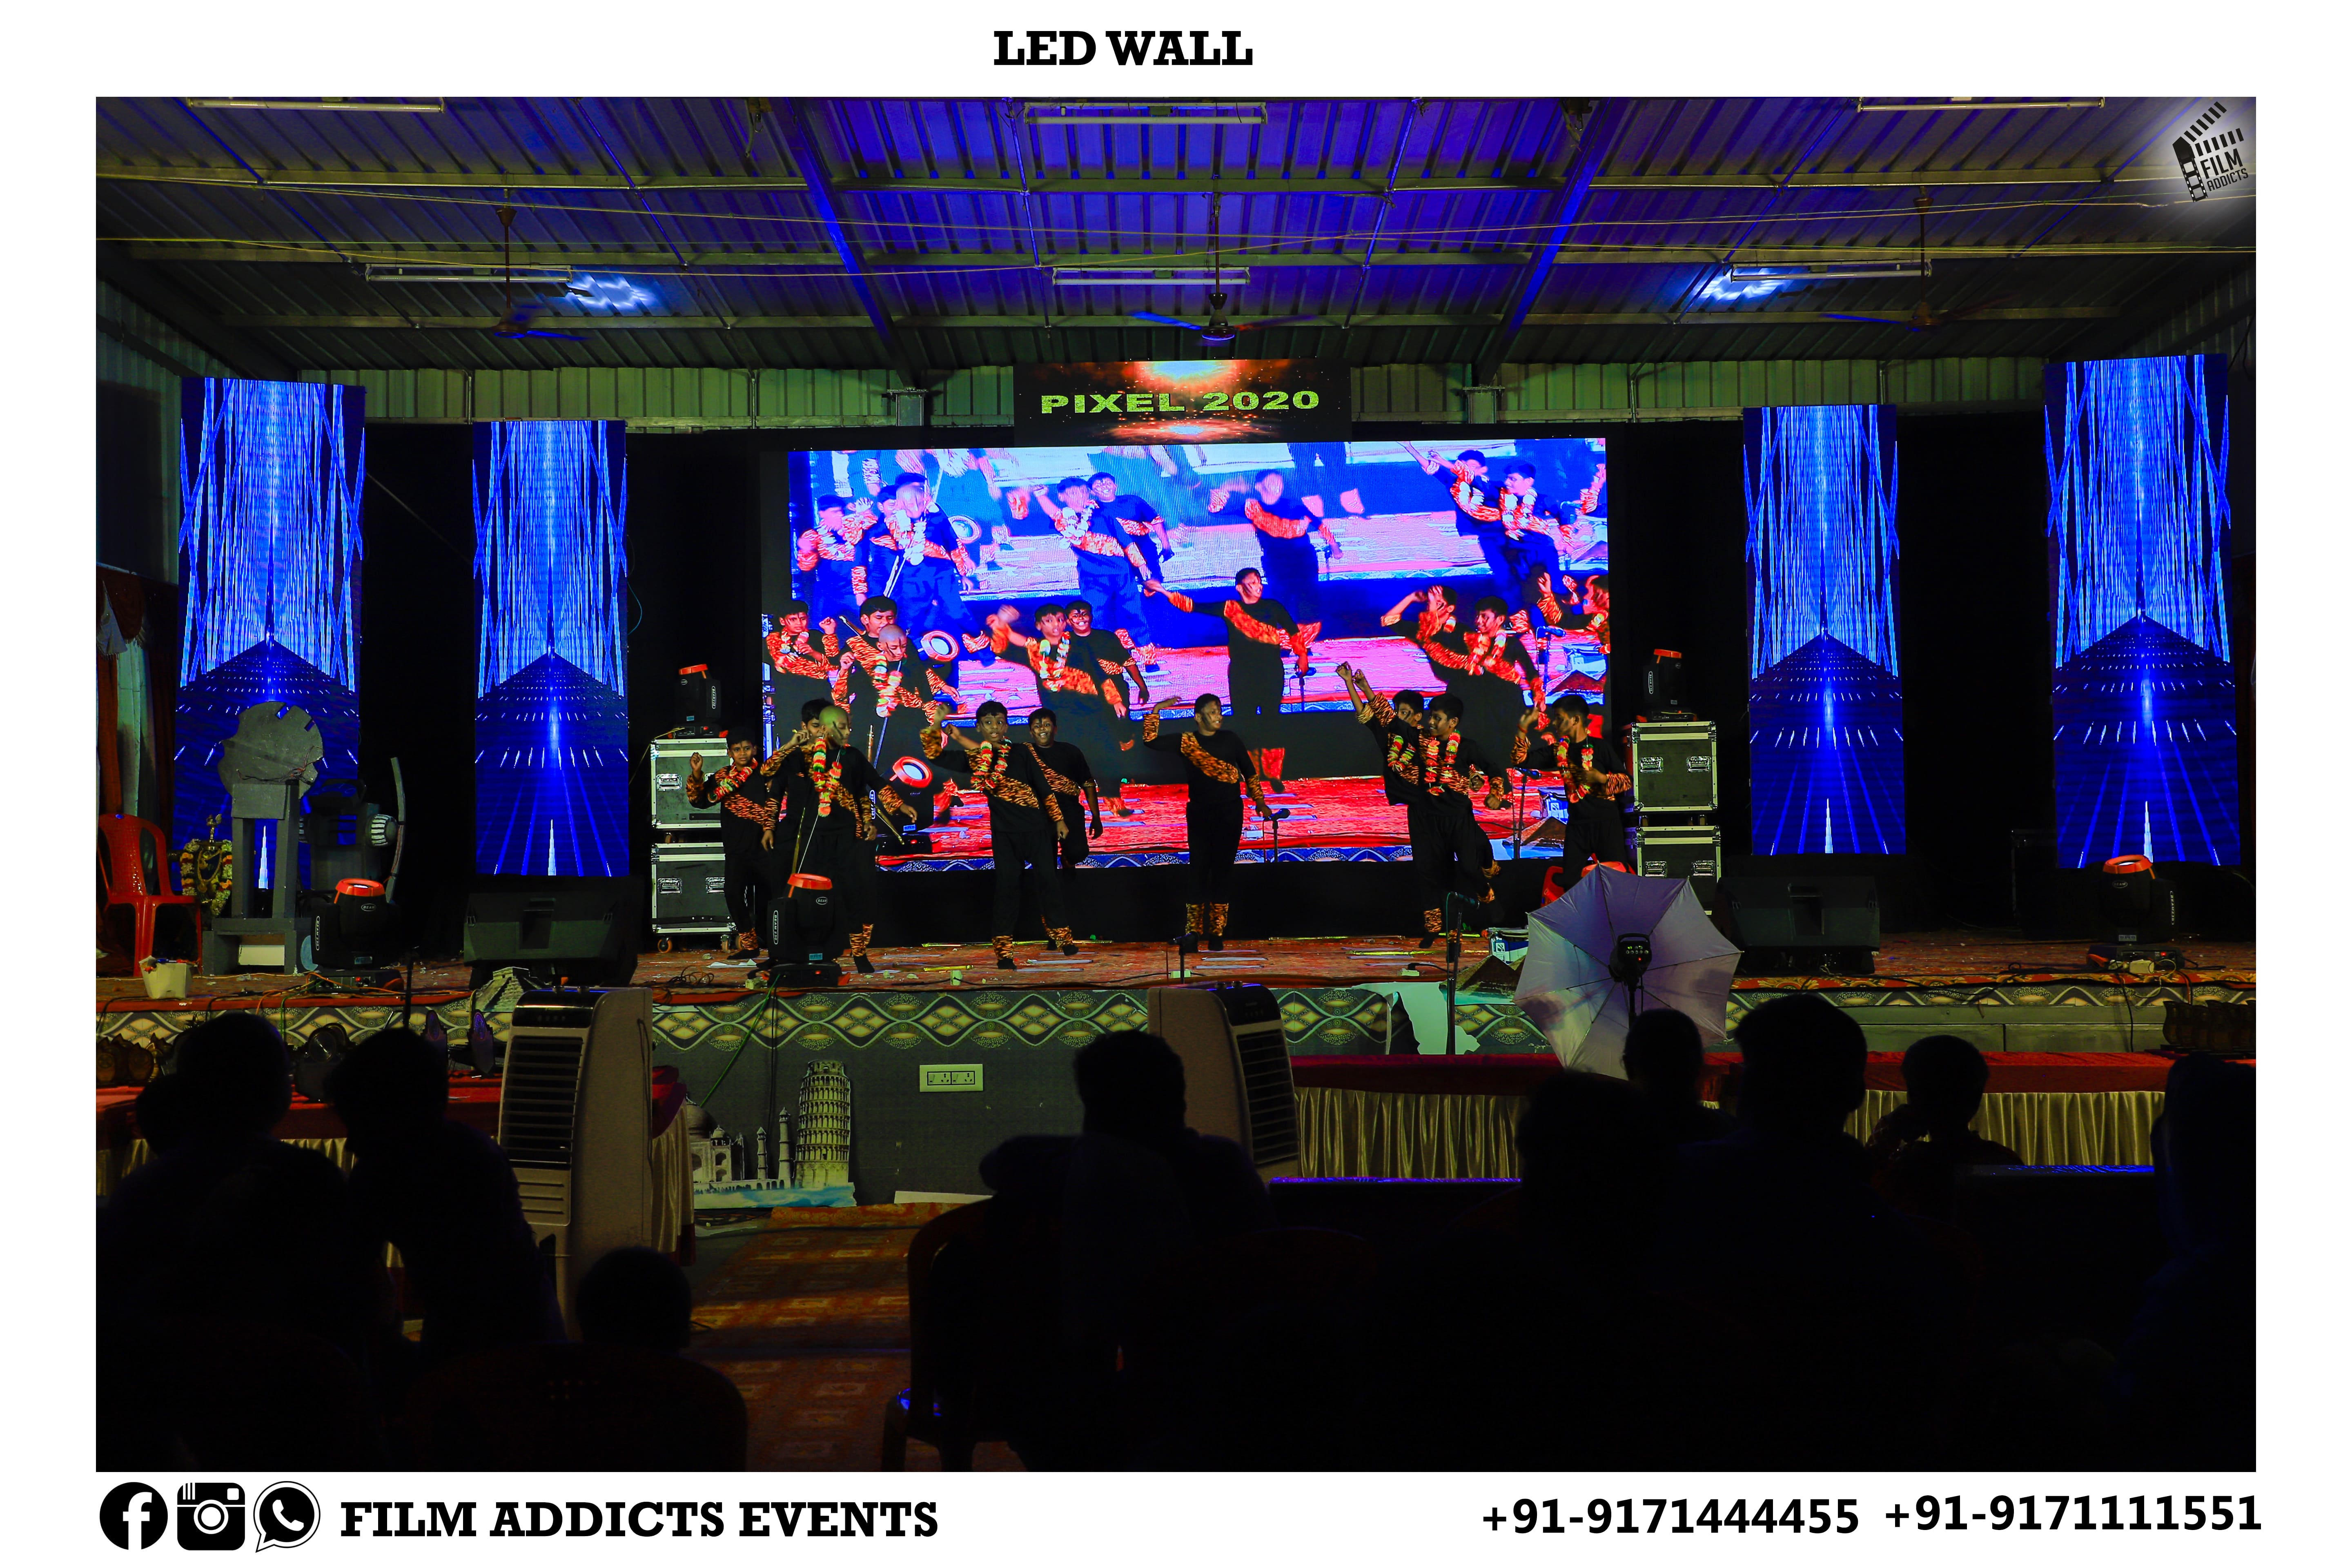 Best LED wall Rental in Madurai, Best LED Wall Services In Madurai ,Best LED Wall Rental Services In Madurai, Best Budget LED Wall Rental  Services in madurai, Best Wedding LED Wall Rentals In Madurai, Best clarity in led wall rentals in Madurai, Best cost-effective display rentals in Madurai, Best crisp, bright, high resolution led video services in Madurai, Best led wall rental services in Madurai, Best tailored lighting, vision and sound solutions led rentals in Madurai, Best outstanding new LED panels rental Service in Madurai, Best Indoor and Outdoor LED panels rental Service in Madurai, Best high resolution LED display rental Service in Madurai, Best Wedding LED wall rentals in Madurai, Best Grand wedding LED wall rentals in Madurai, Best LED wall rental Service in Madurai, Best LED Video Services in Madurai, Best Grand Wedding LED wall Renatls in madurai, Best LED wall Rentals for Grand Occasions in Madurai, Best Wedding LED Video Services in Madurai, Best Wedding LED video wall Rental Services in Madurai, Best LED Video Wall Rentals for Grand Occassions in Madurai, Best LED Video Wall Rentals for events in Madurai, Best LED video Services for live events in Madurai, Best video wall rentals for Live events in Madurai, Best LED Video Wall Rentals for Live events in Madurai, Best LED Video Wall On Hire in Madurai, Best LED Video Wall Services in Madurai, Best LED Video Wall Service Systems in Madurai, Best LED Wall Washer Light Services in Madurai, Best LED Wall Light Services in Madurai, Best LED Wall Mount Bracket Services in Madurai.